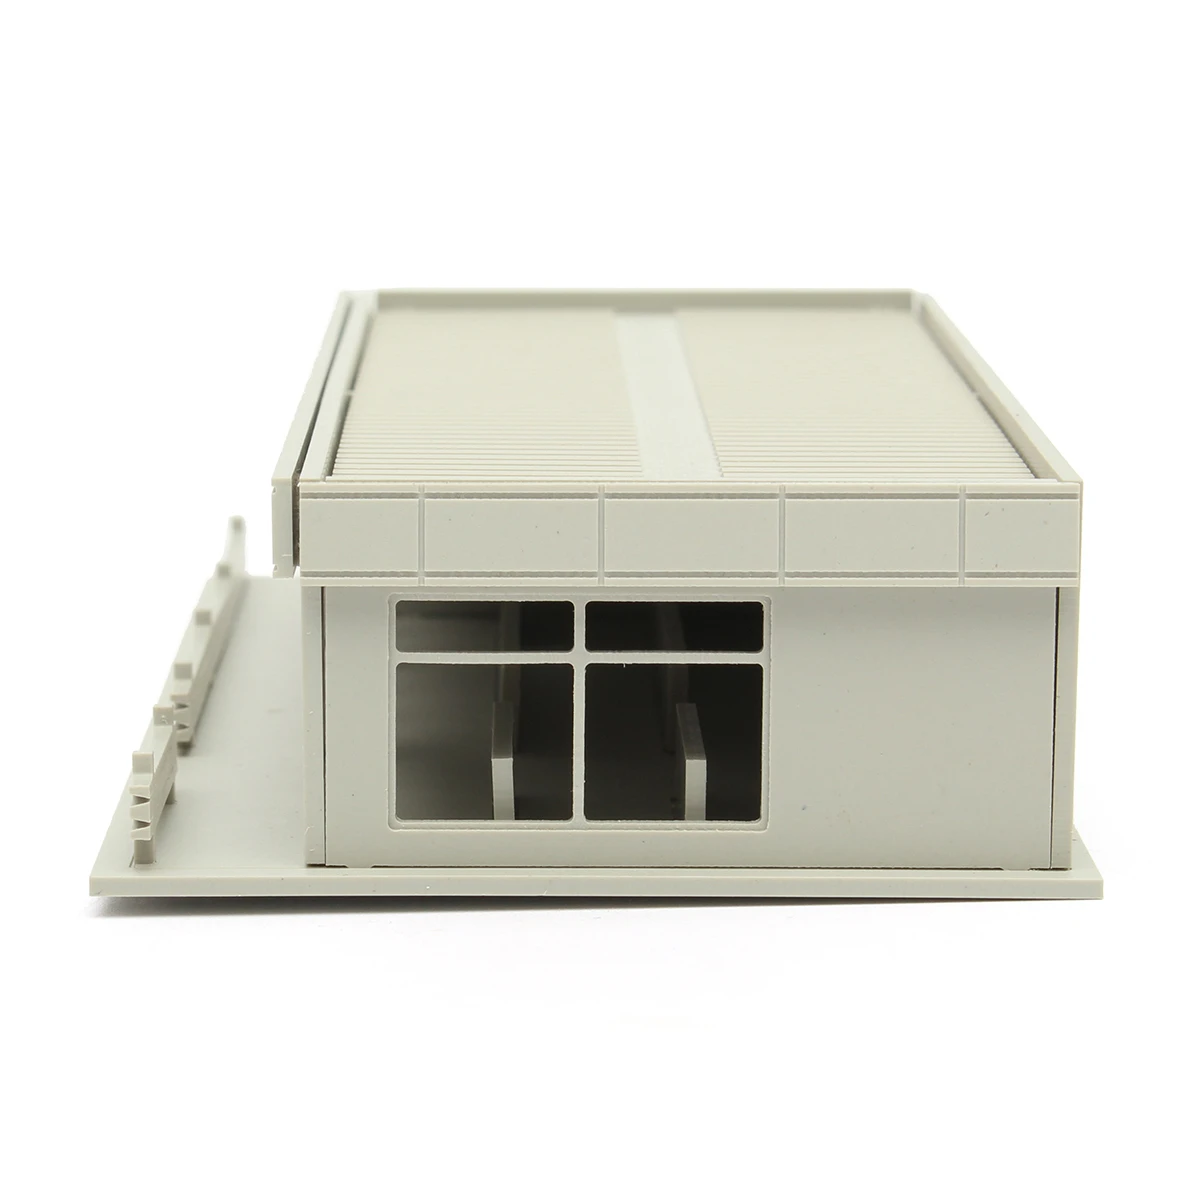 Outland Models Modern City Roadside Convenience Store Toy For GUNDAM Building